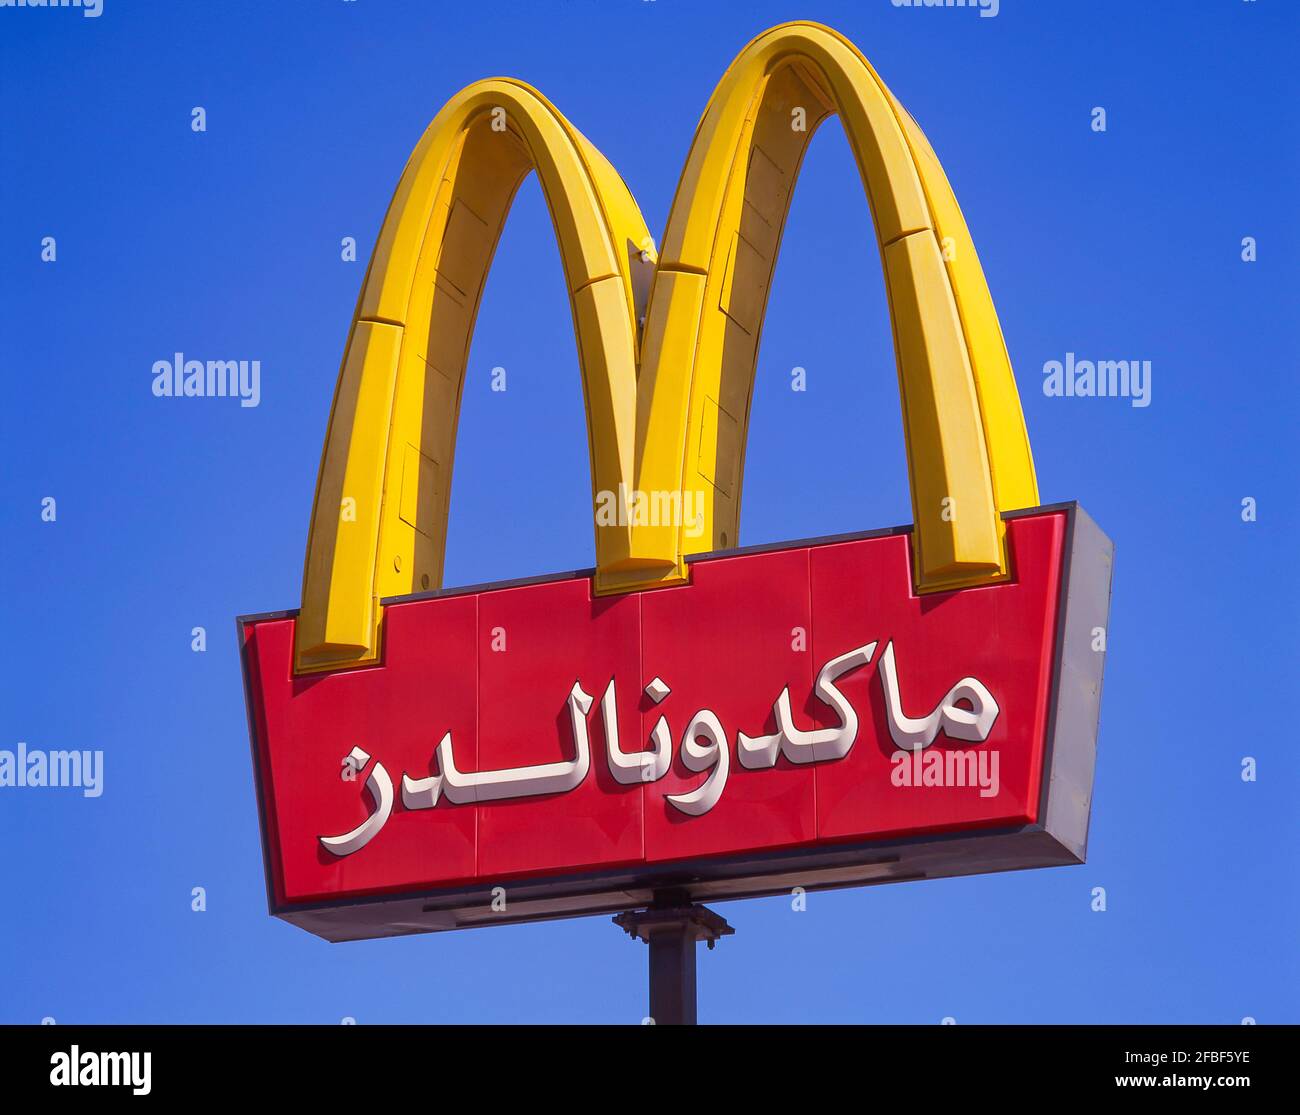 McDonald's Fast Food Restaurant advertising sign, Muscat, Masqat Governorate, Sultanate of Oman Stock Photo